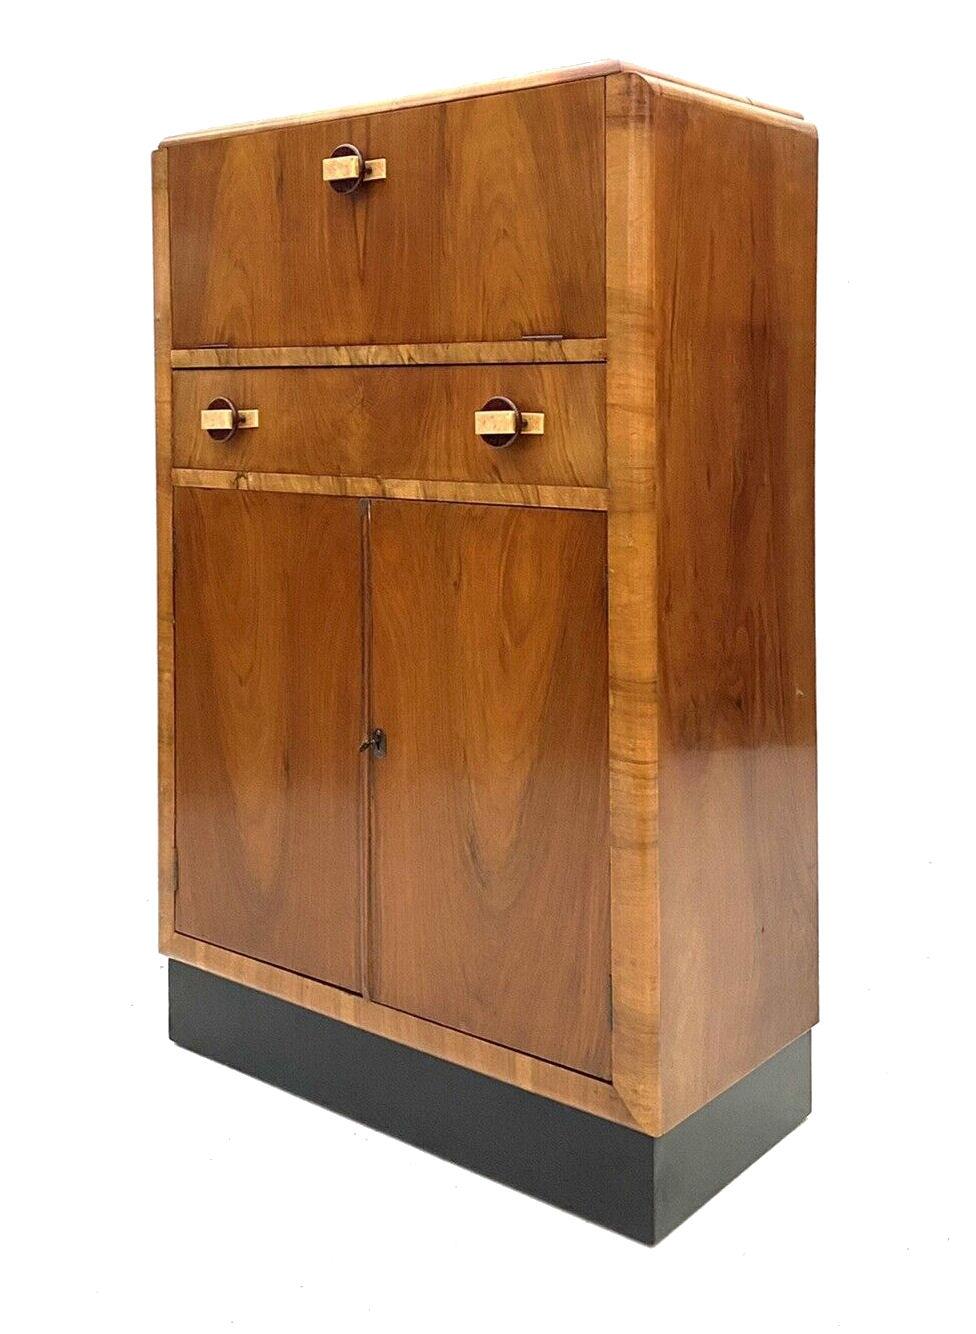 For your consideration is this fabulously stylish 1930's Art Deco cocktail cabinet. This dry bar dates to the 1930's and has all the bells and whistles you want from a cocktail cabinet. The upper interior has a mirrored base and mirrored backing .